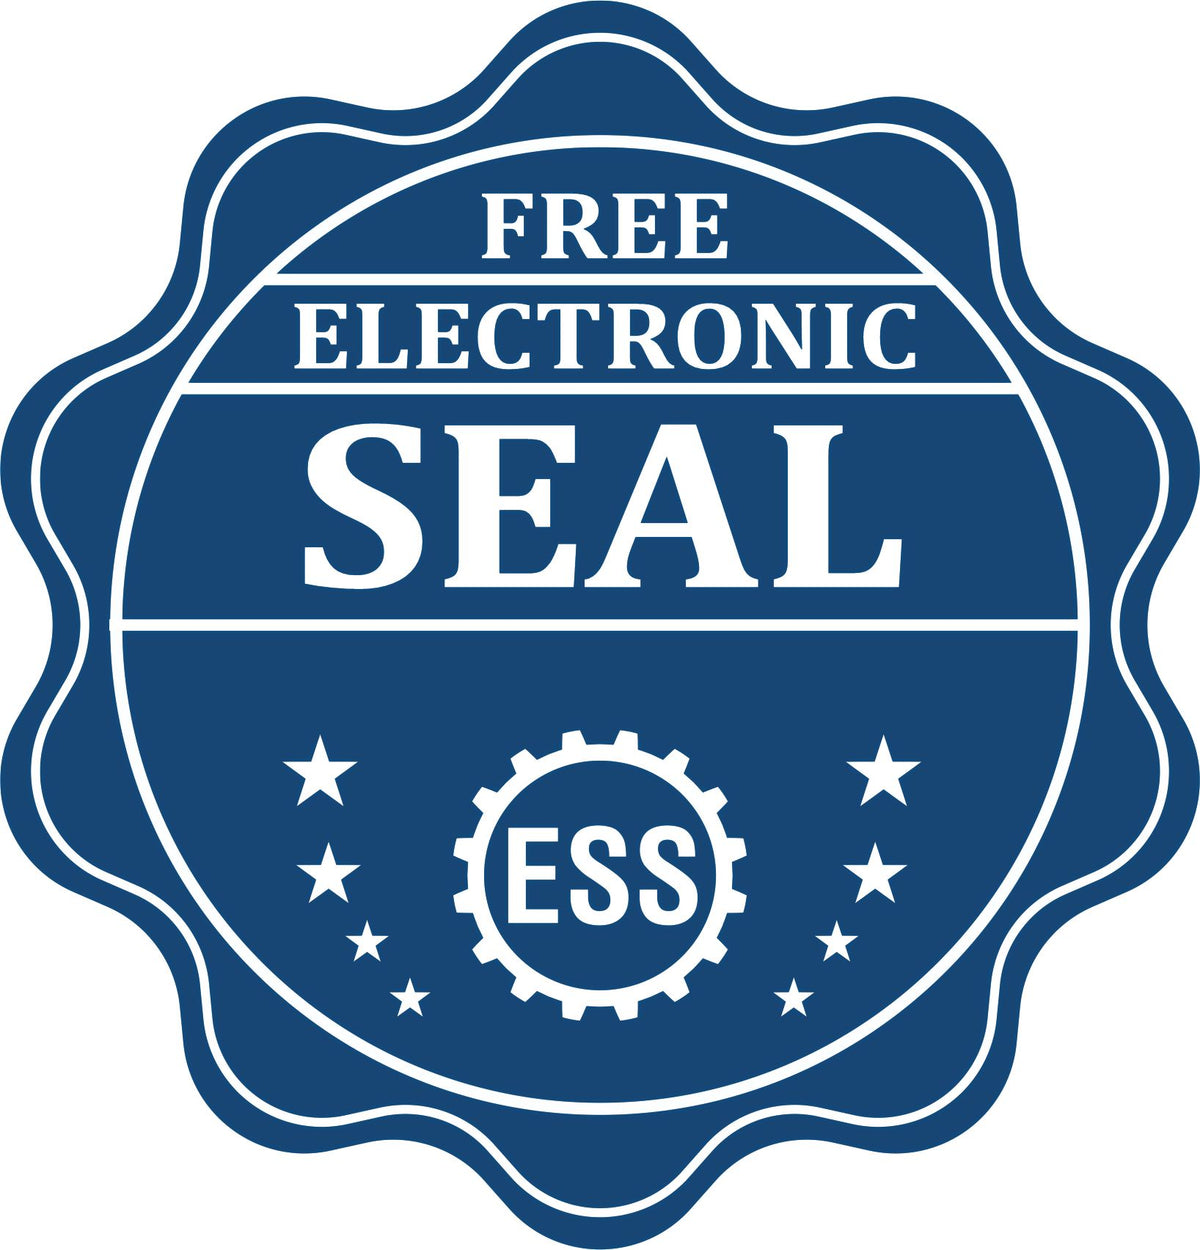 A badge showing a free electronic seal for the MaxLight Premium Pre-Inked Washington Rectangular Notarial Stamp with stars and the ESS gear on the emblem.